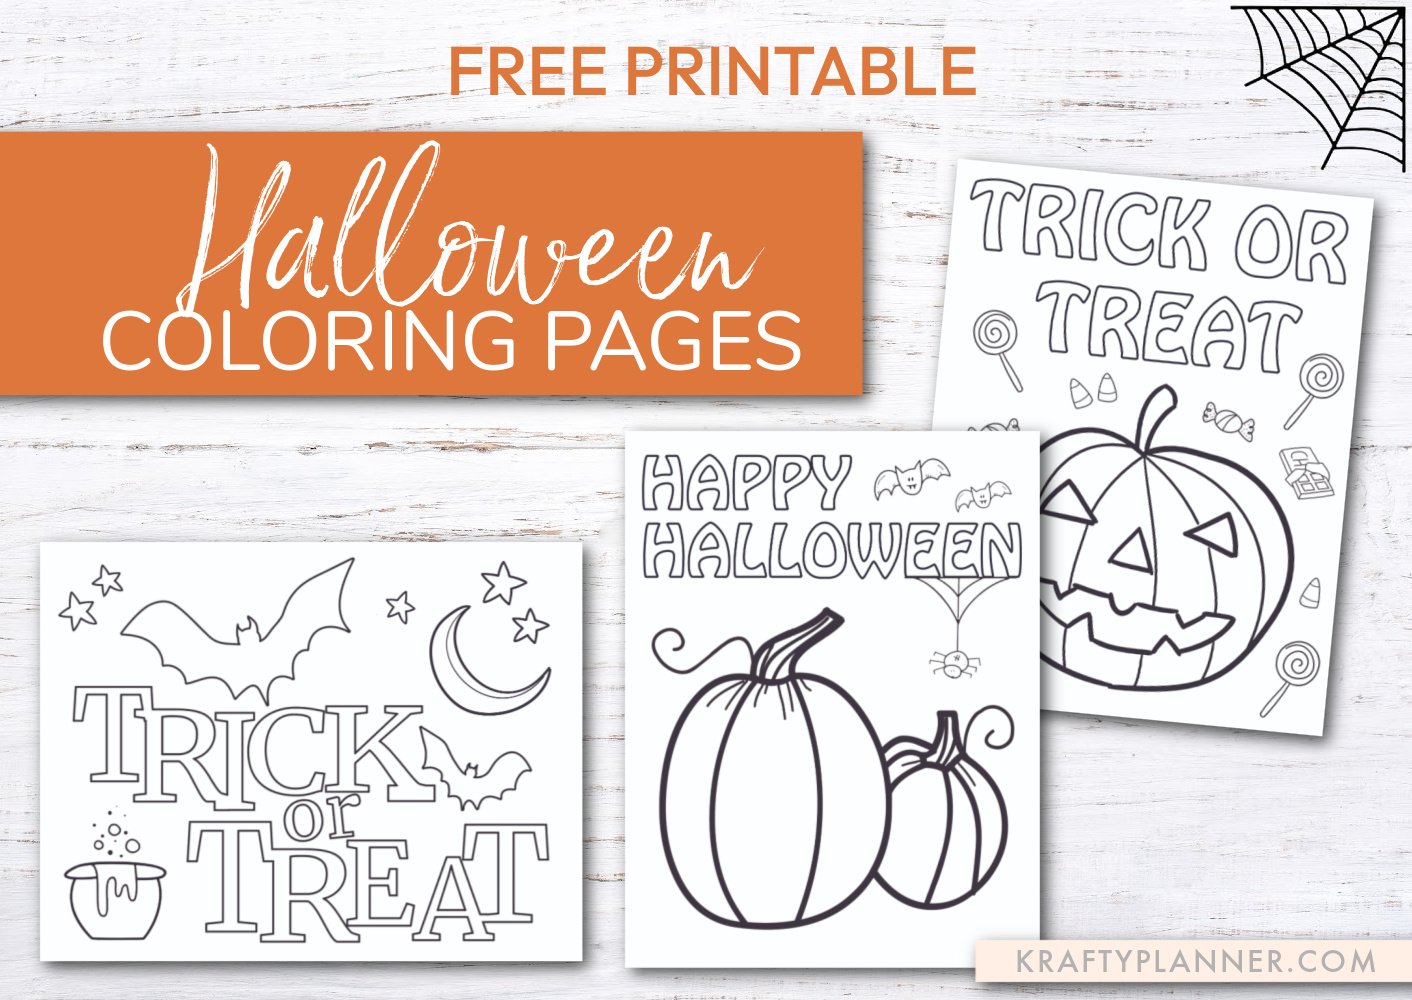 Halloween Coloring Pages {Free Printable} — Krafty Planner